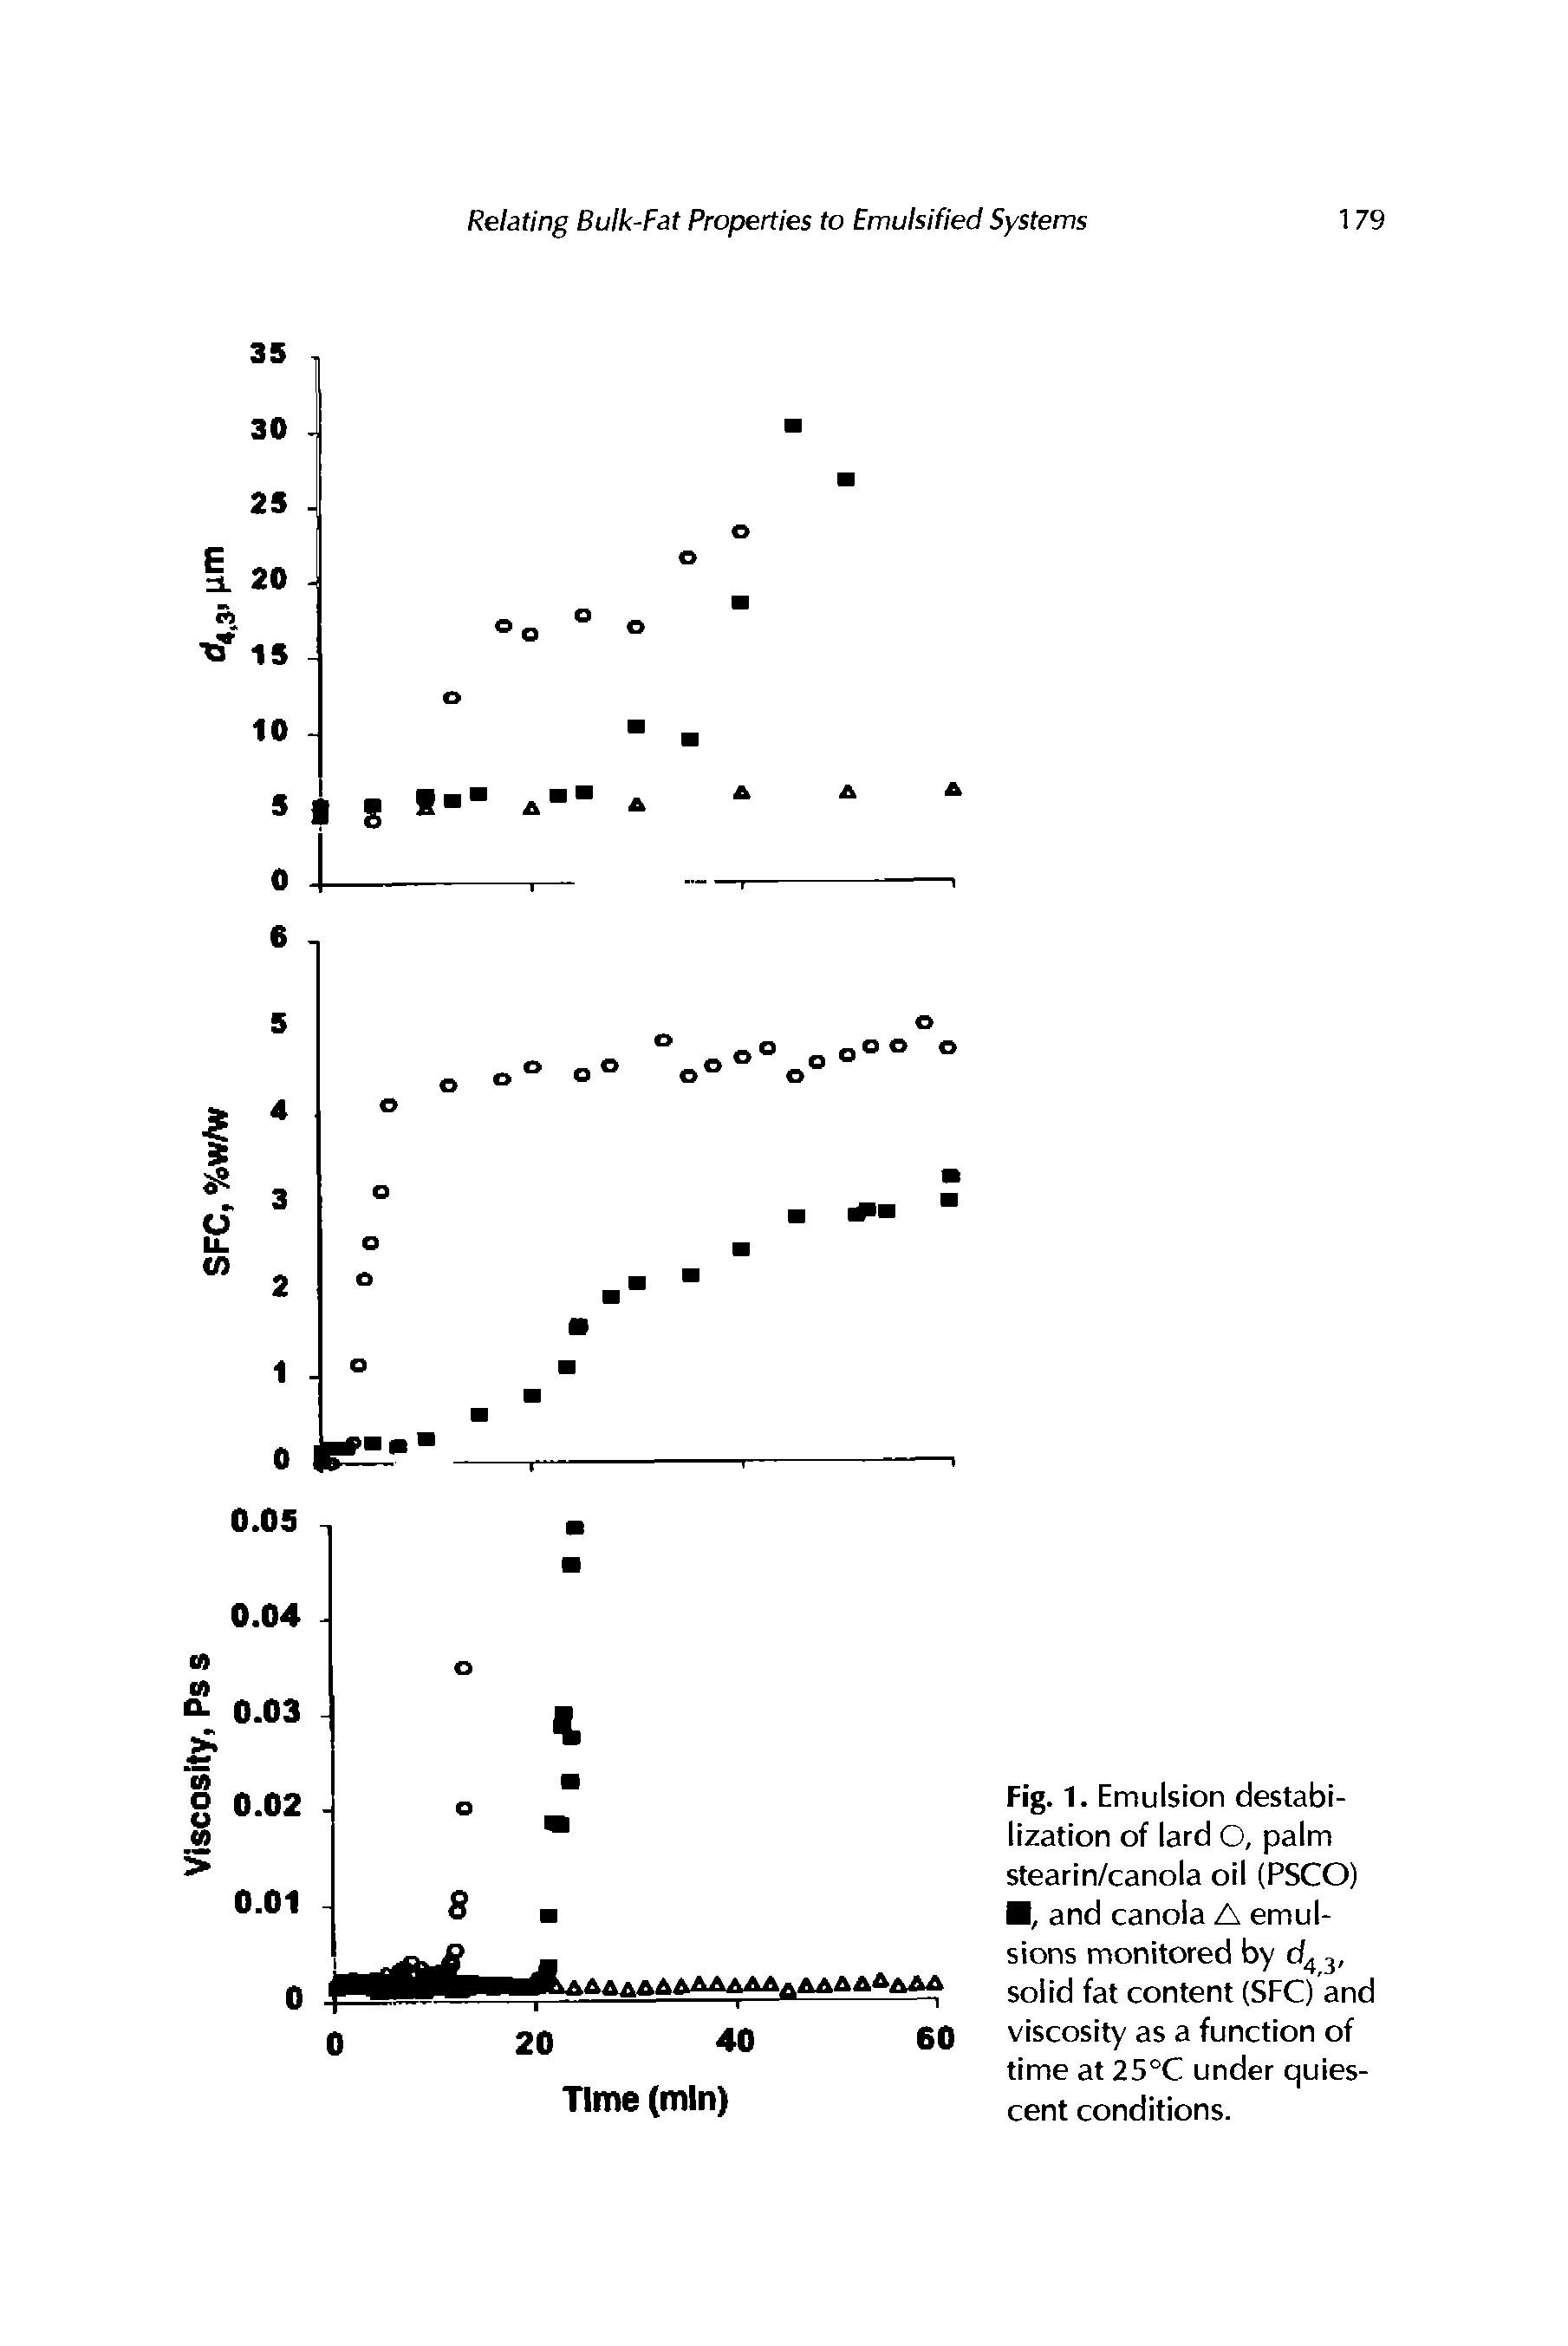 Fig. 1. Emulsion destabilization of lard O, palm stearin/canola oil (PSCO) , and canola A emulsions monitored b y 3, solid fat content (SFC) and viscosity as a function of time at 25°C under quiescent conditions.